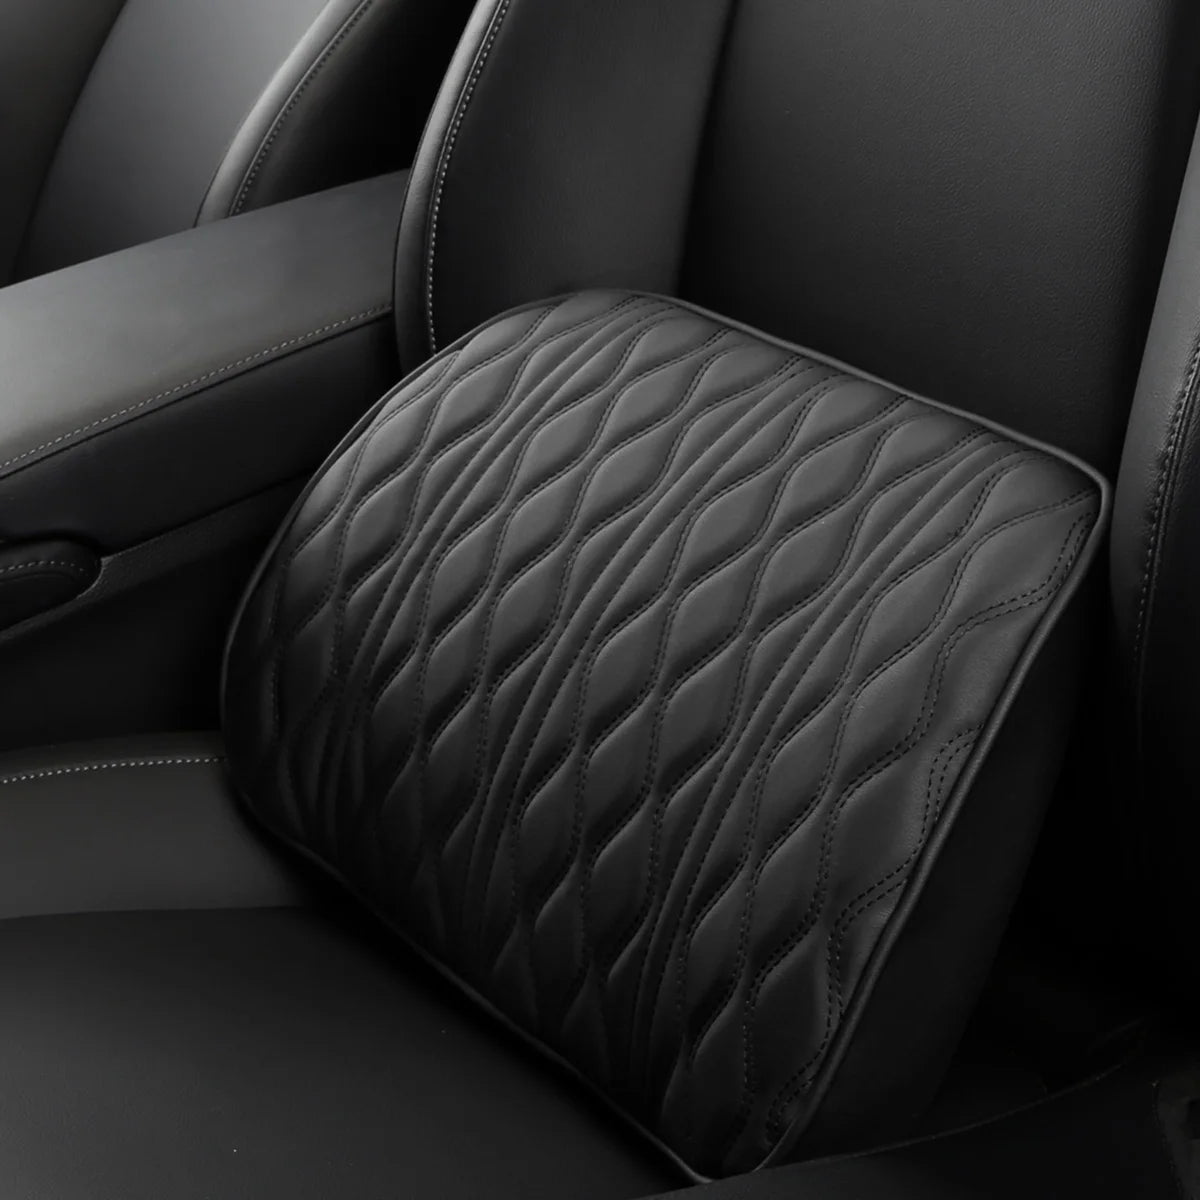 Premium PU Leather Car Neck Pillow: Lumbar Support Memory Backrest Headrest Cushion for Ultimate Comfort and Style